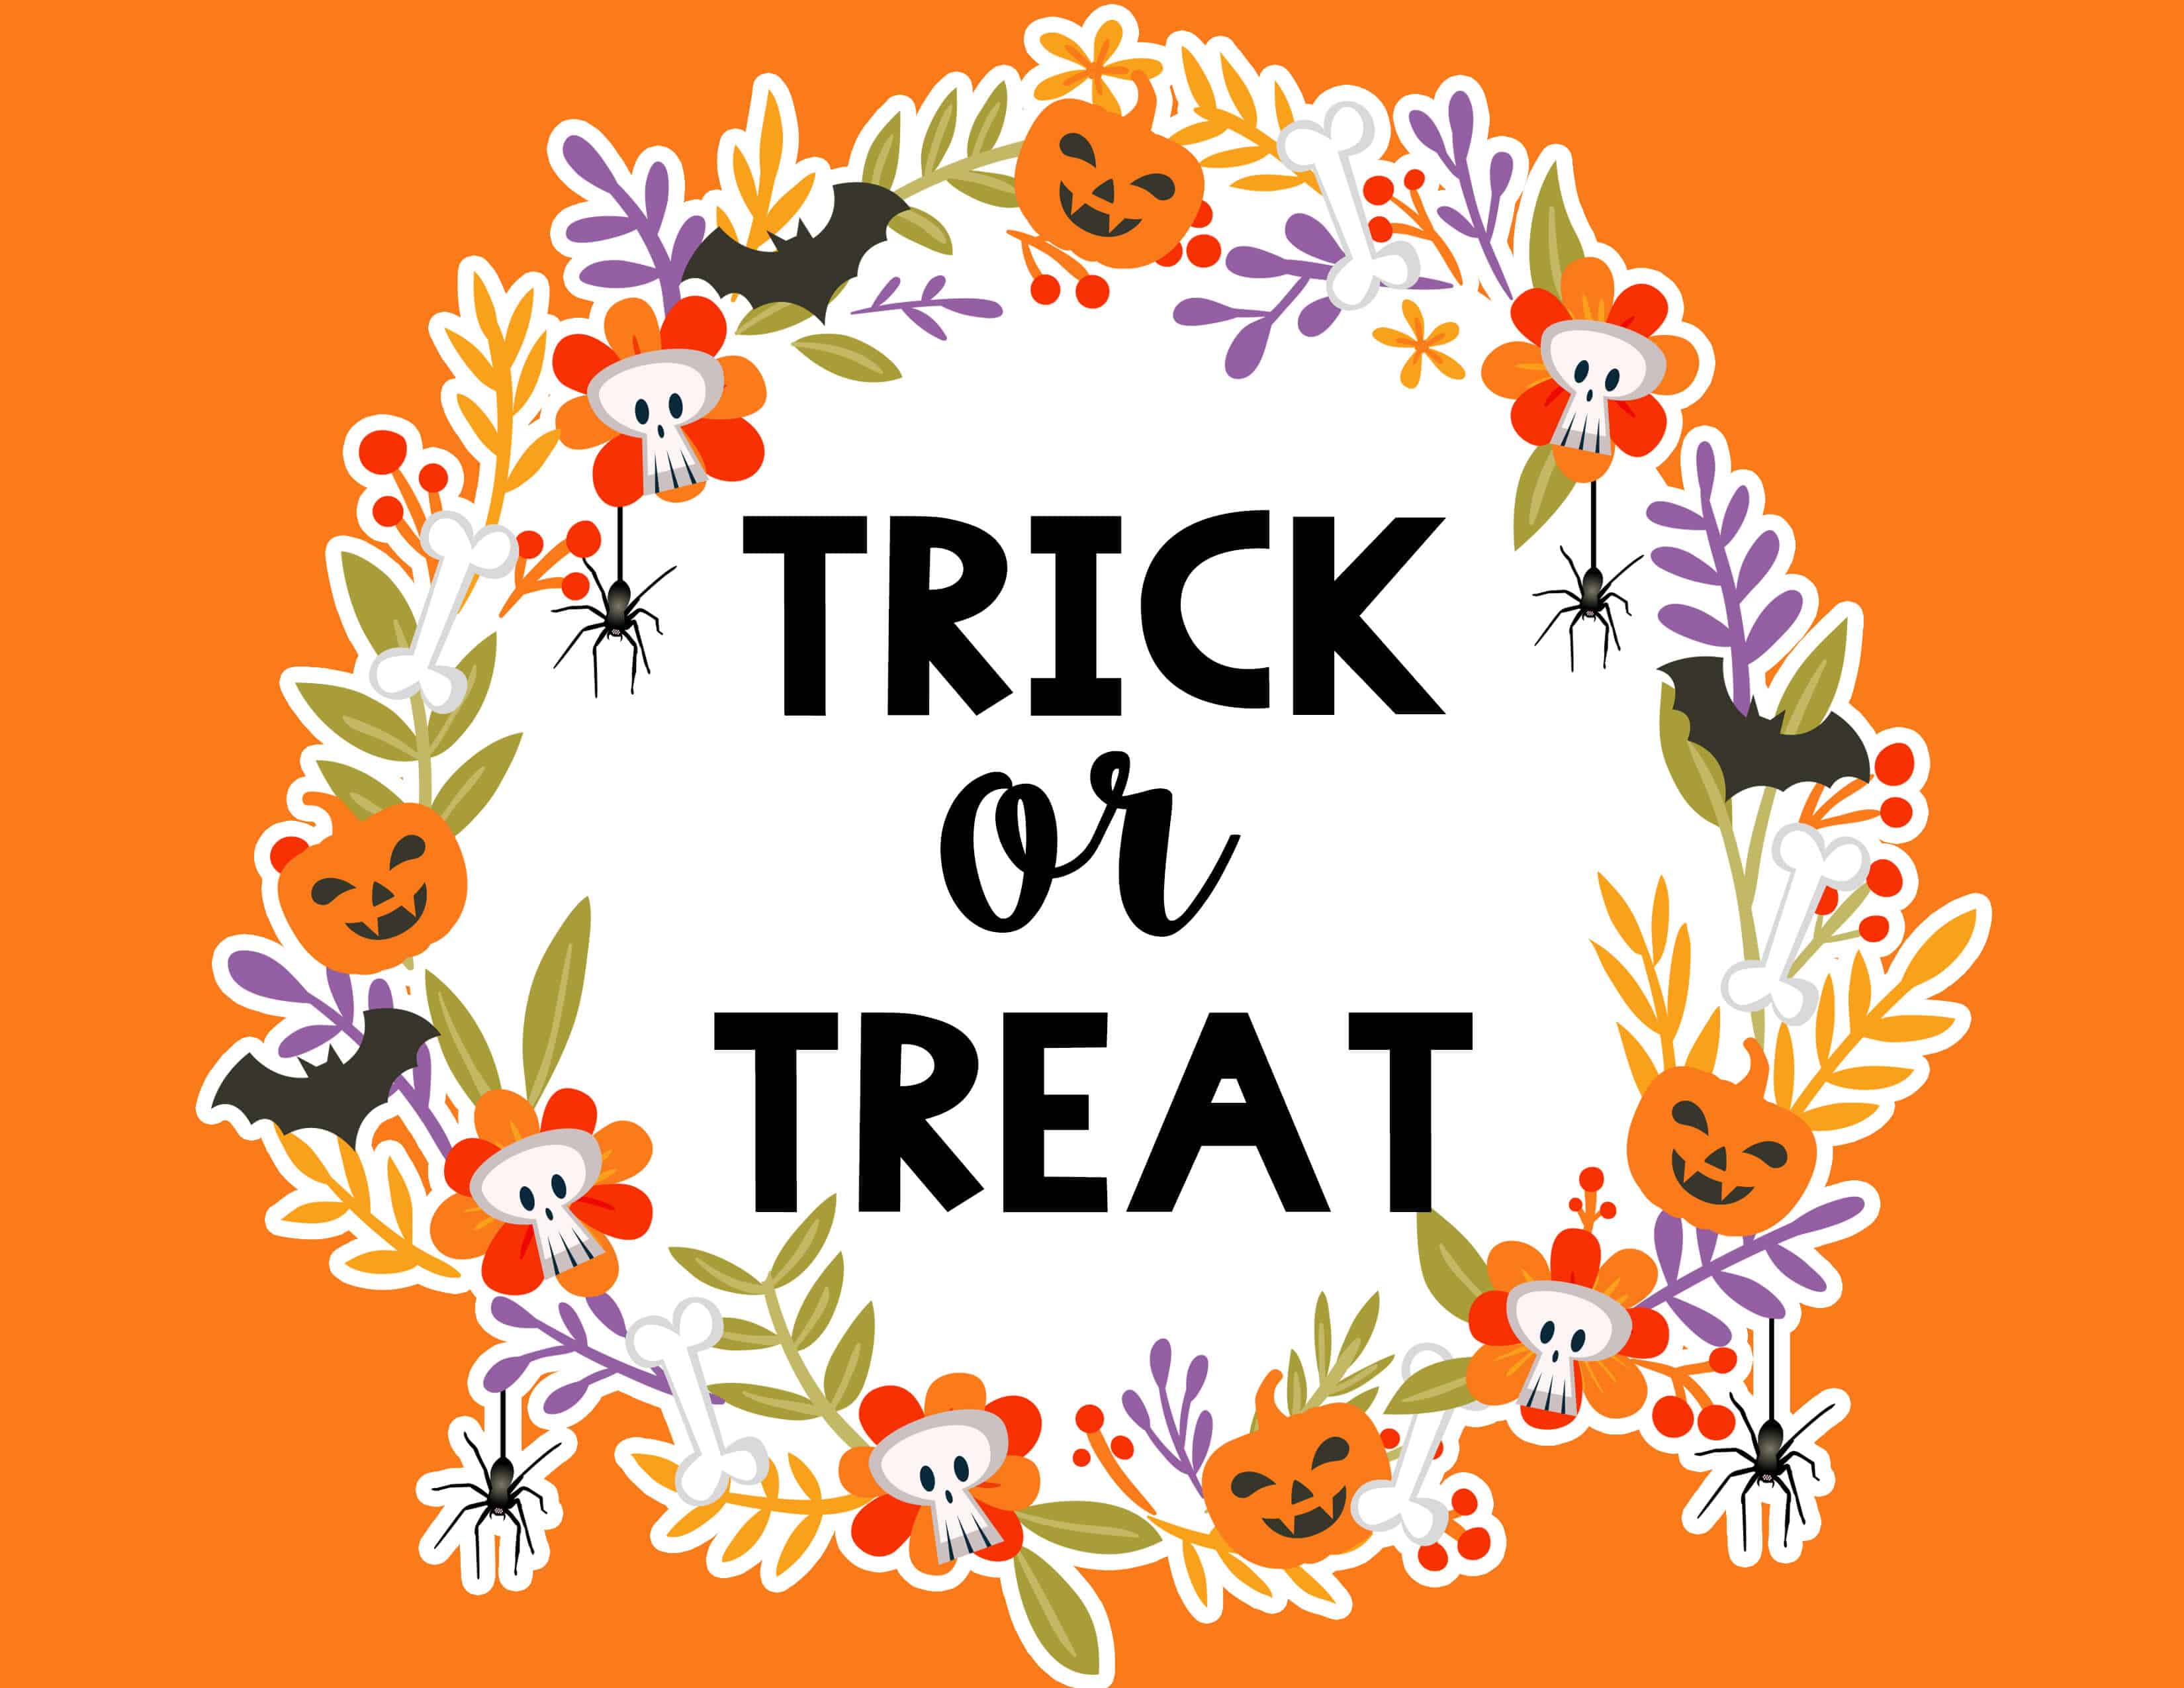 Free Printable Halloween Trick or Treat Signs to decorate your porch on October 31. Also download the matching "Out of Candy" signs. #halloween #freeprintable #fall #trickortreat #home #lovelyplanner